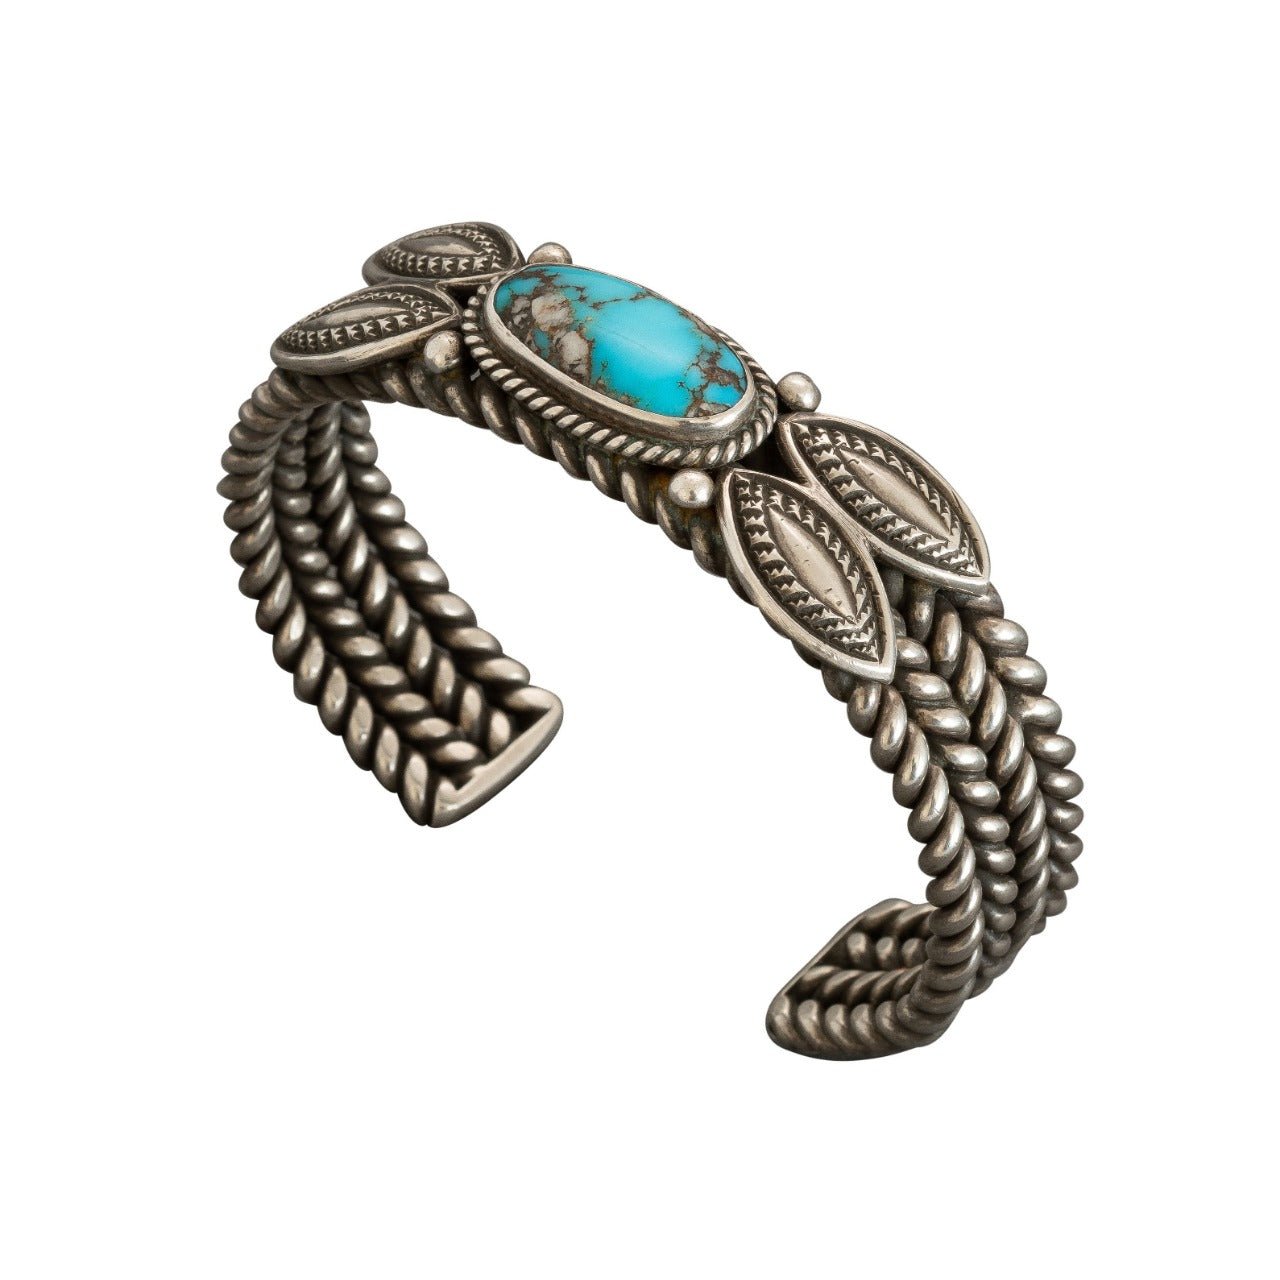 Perry Shorty Bracelet of Natural Turquoise and Twisted Silver Wire - Turquoise & Tufa